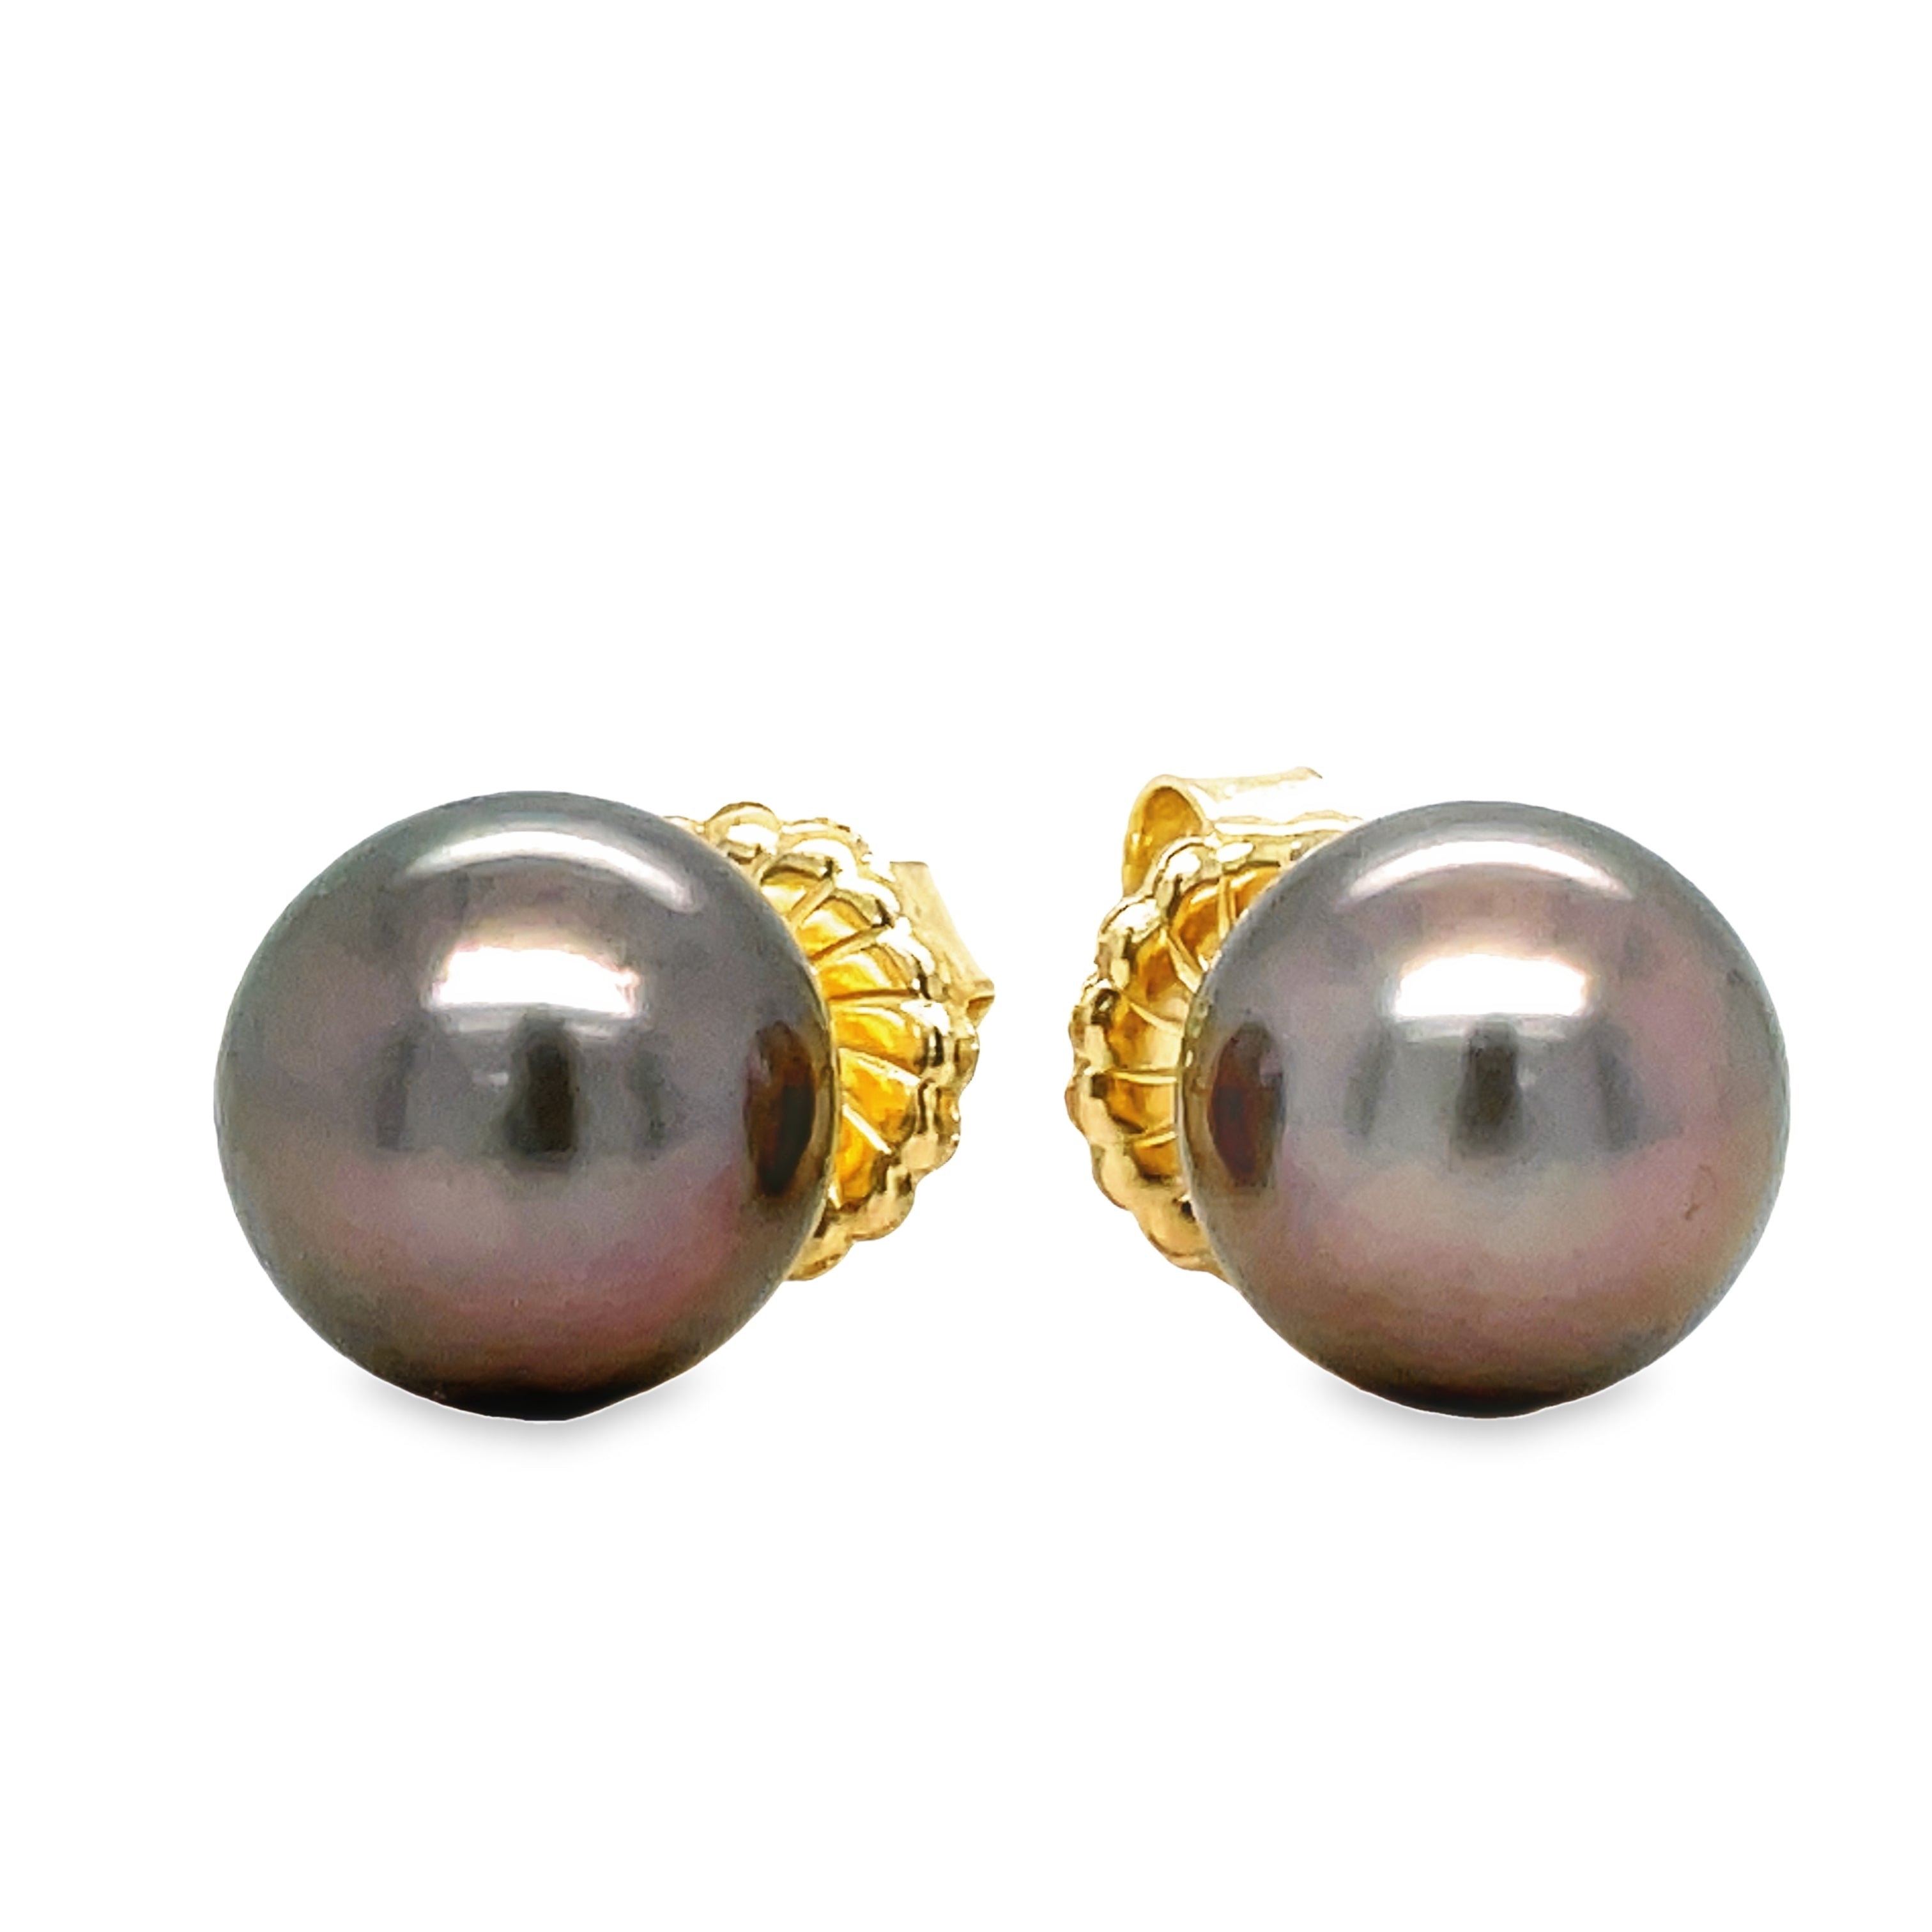 Indulge in elegance and luxury with our Tahitian Pearls Stud Earrings. Cultivated in pristine waters, these 10.00 mm pearls exude natural beauty. Set in 14k yellow gold with a secure friction backing, these 10.00 mm pearls will elevate your look with the ultimate symbol of sophistication.